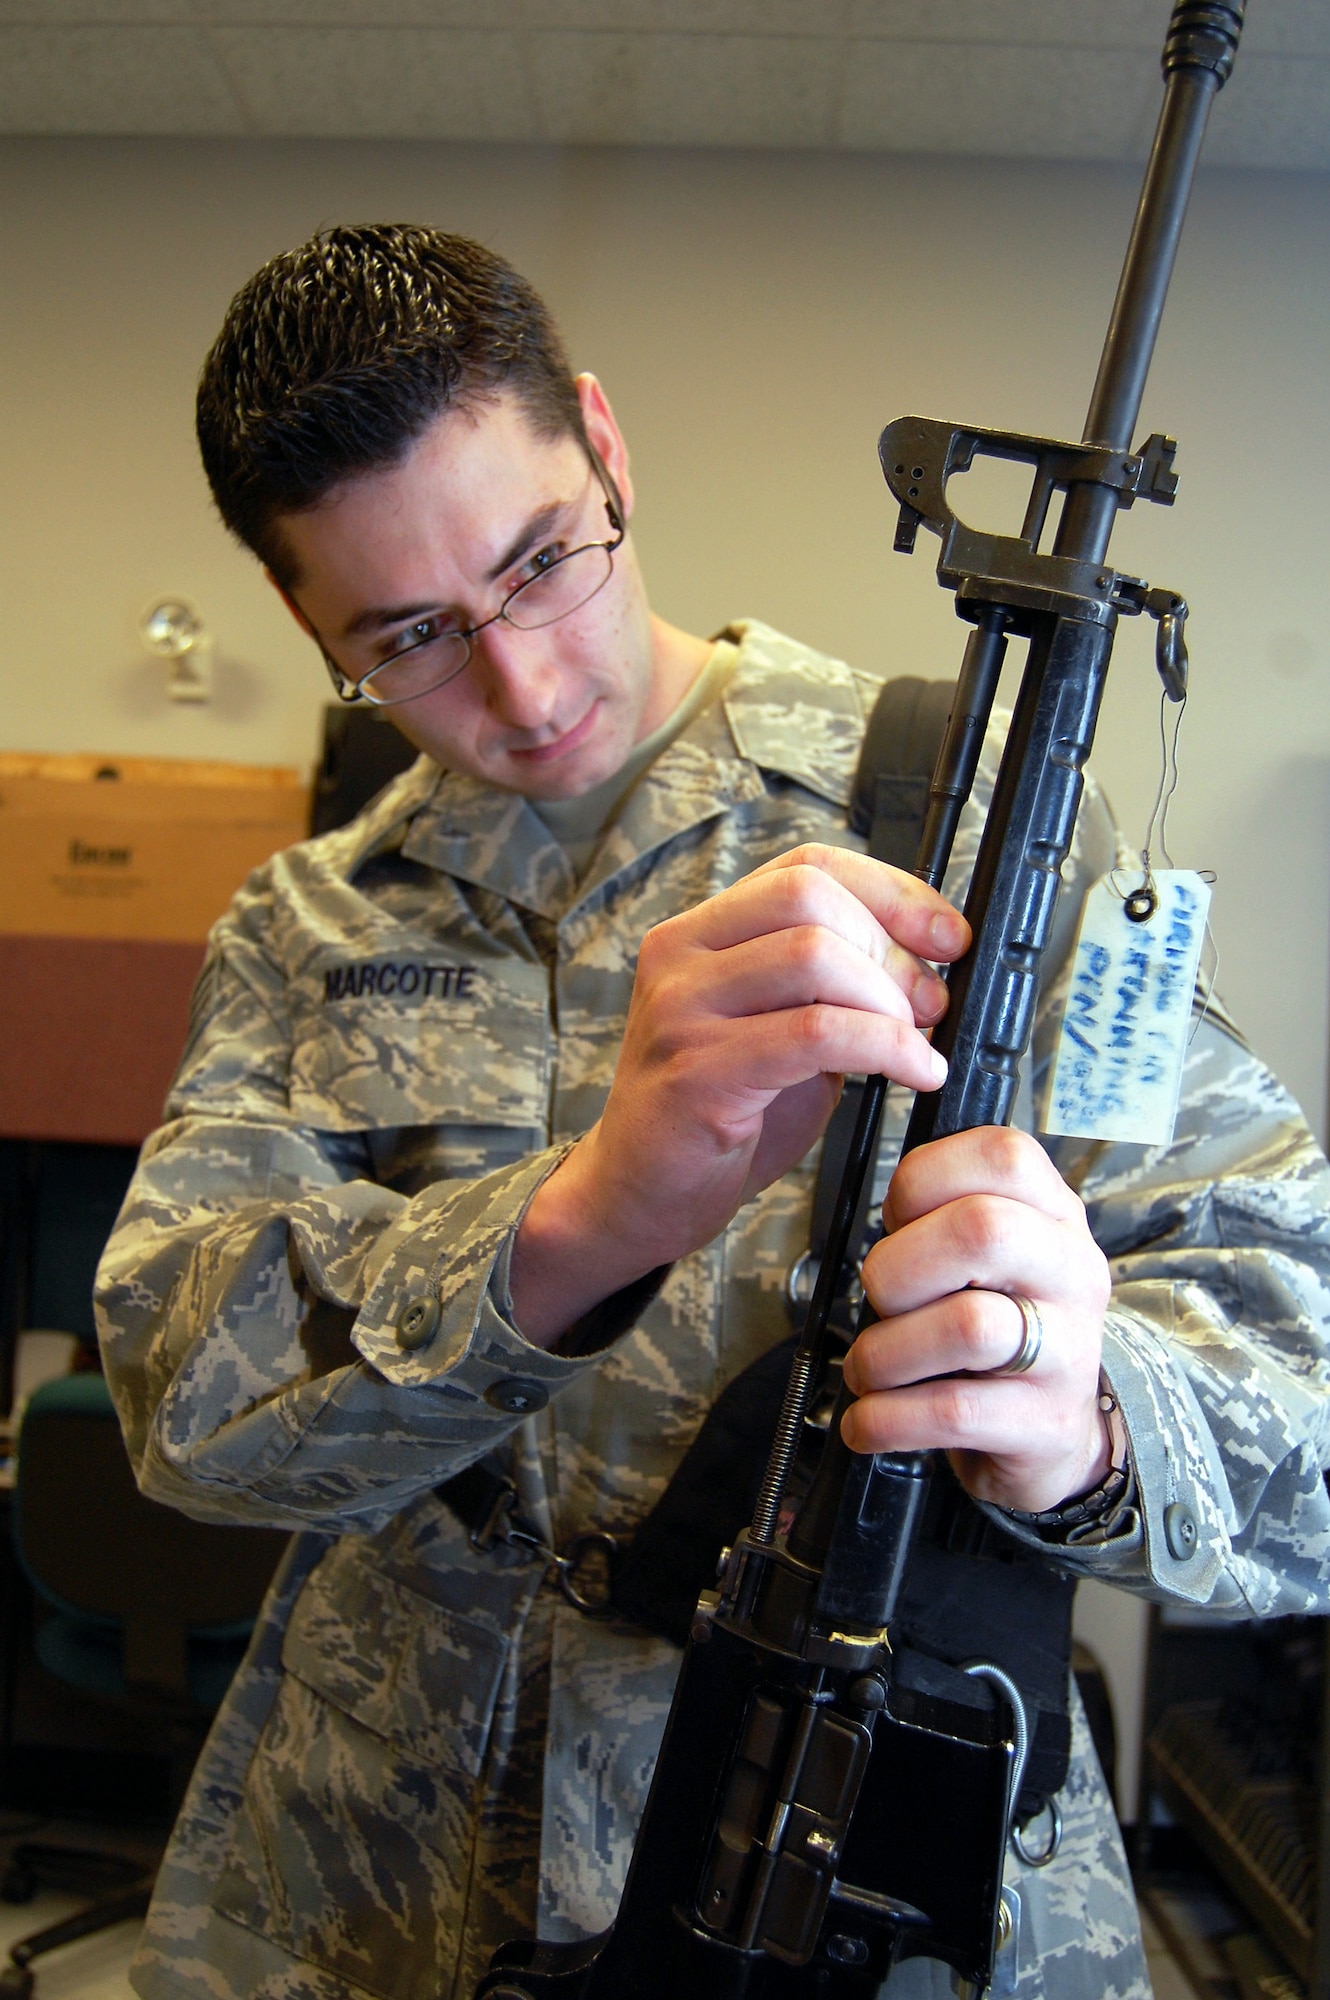 Staff Sgt. Ryan Marcotte inspects the forward assembly of a T-65 rifle while working in the armory Sept. 22 at Fort Dix, N.J. Sergeant Marcotte is the Air Force Expeditionary Center armory combat arms instructor. He and three other Airmen manage 48 different weapons systems and 153 different types of foreign weapons in their armory -- the most foreign weapons than any armory in the Air Force. The weapons they care for support more than 7,000 students annually who attend the center's expeditionary courses. (U.S. Air Force photo/Tech. Sgt. Scott T. Sturkol)
